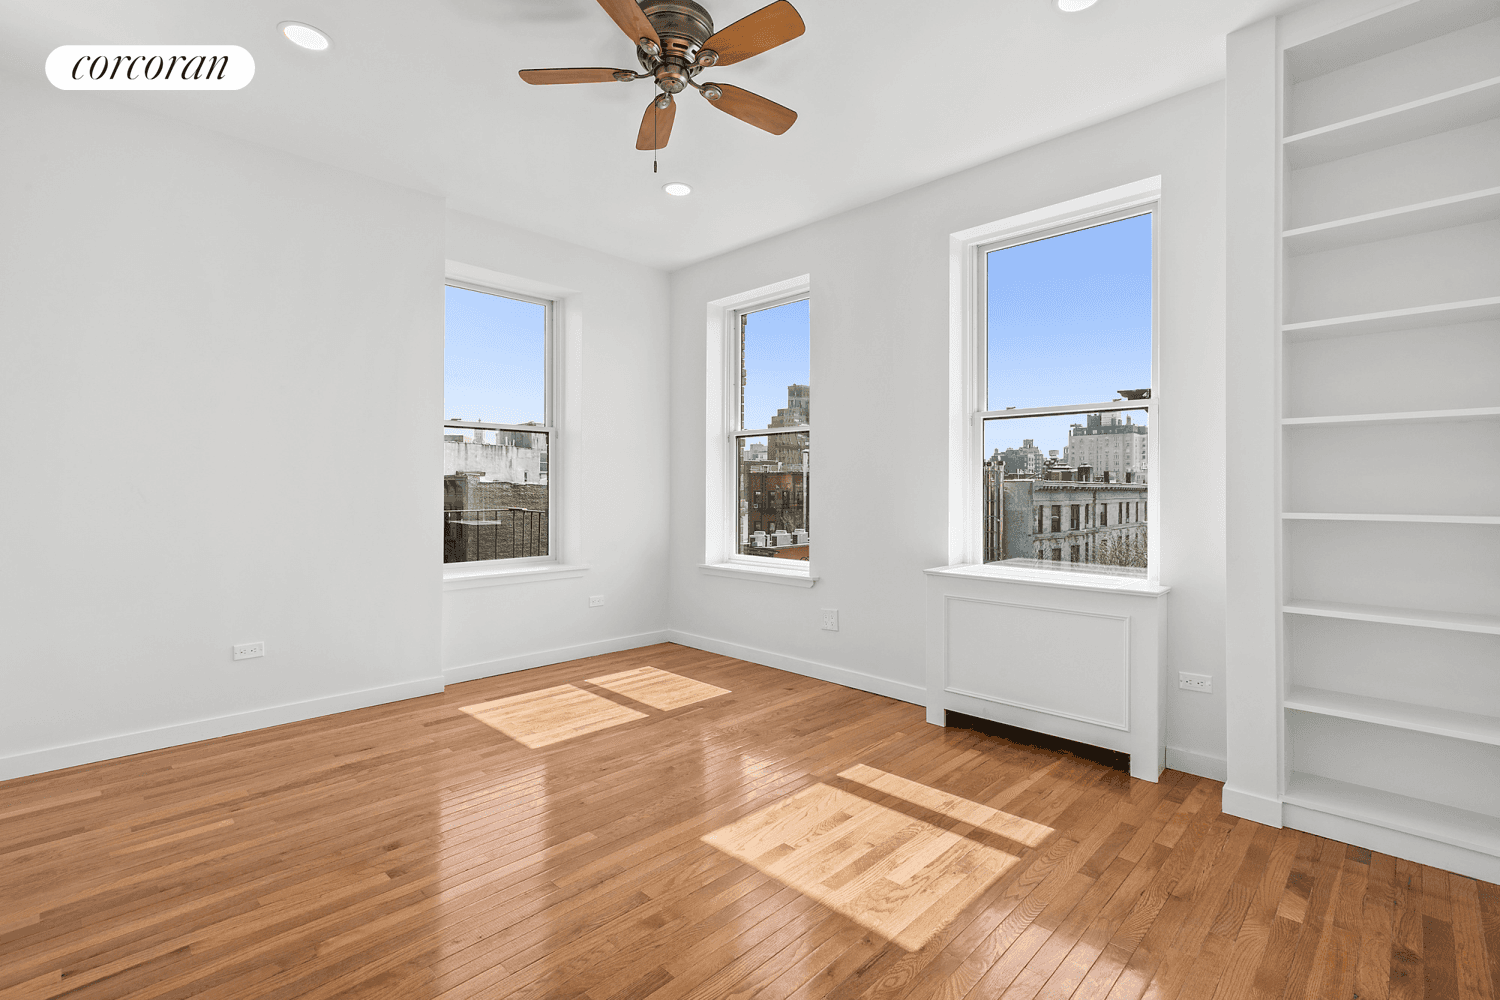 Be the first to live in this newly renovated sun filled 2B 1B in the heart of the West Village.